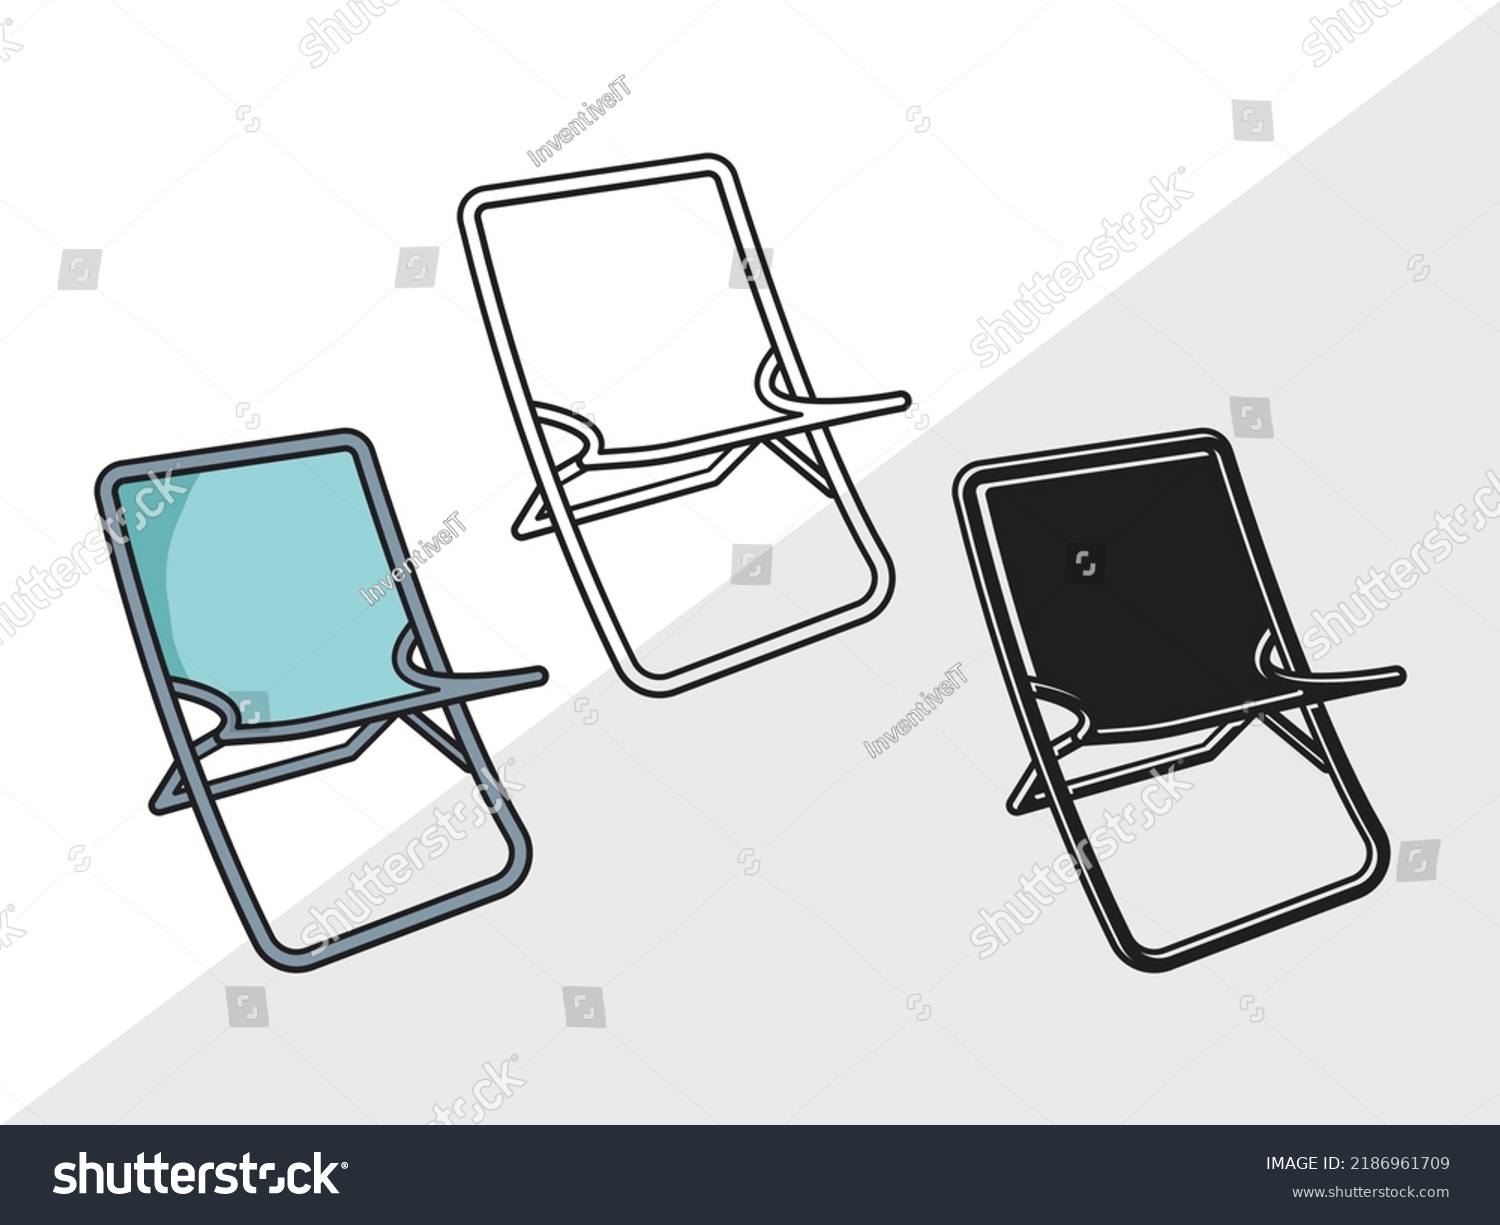 SVG of Folding Beach Chairs Clipart SVG Printable Vector Illustration svg